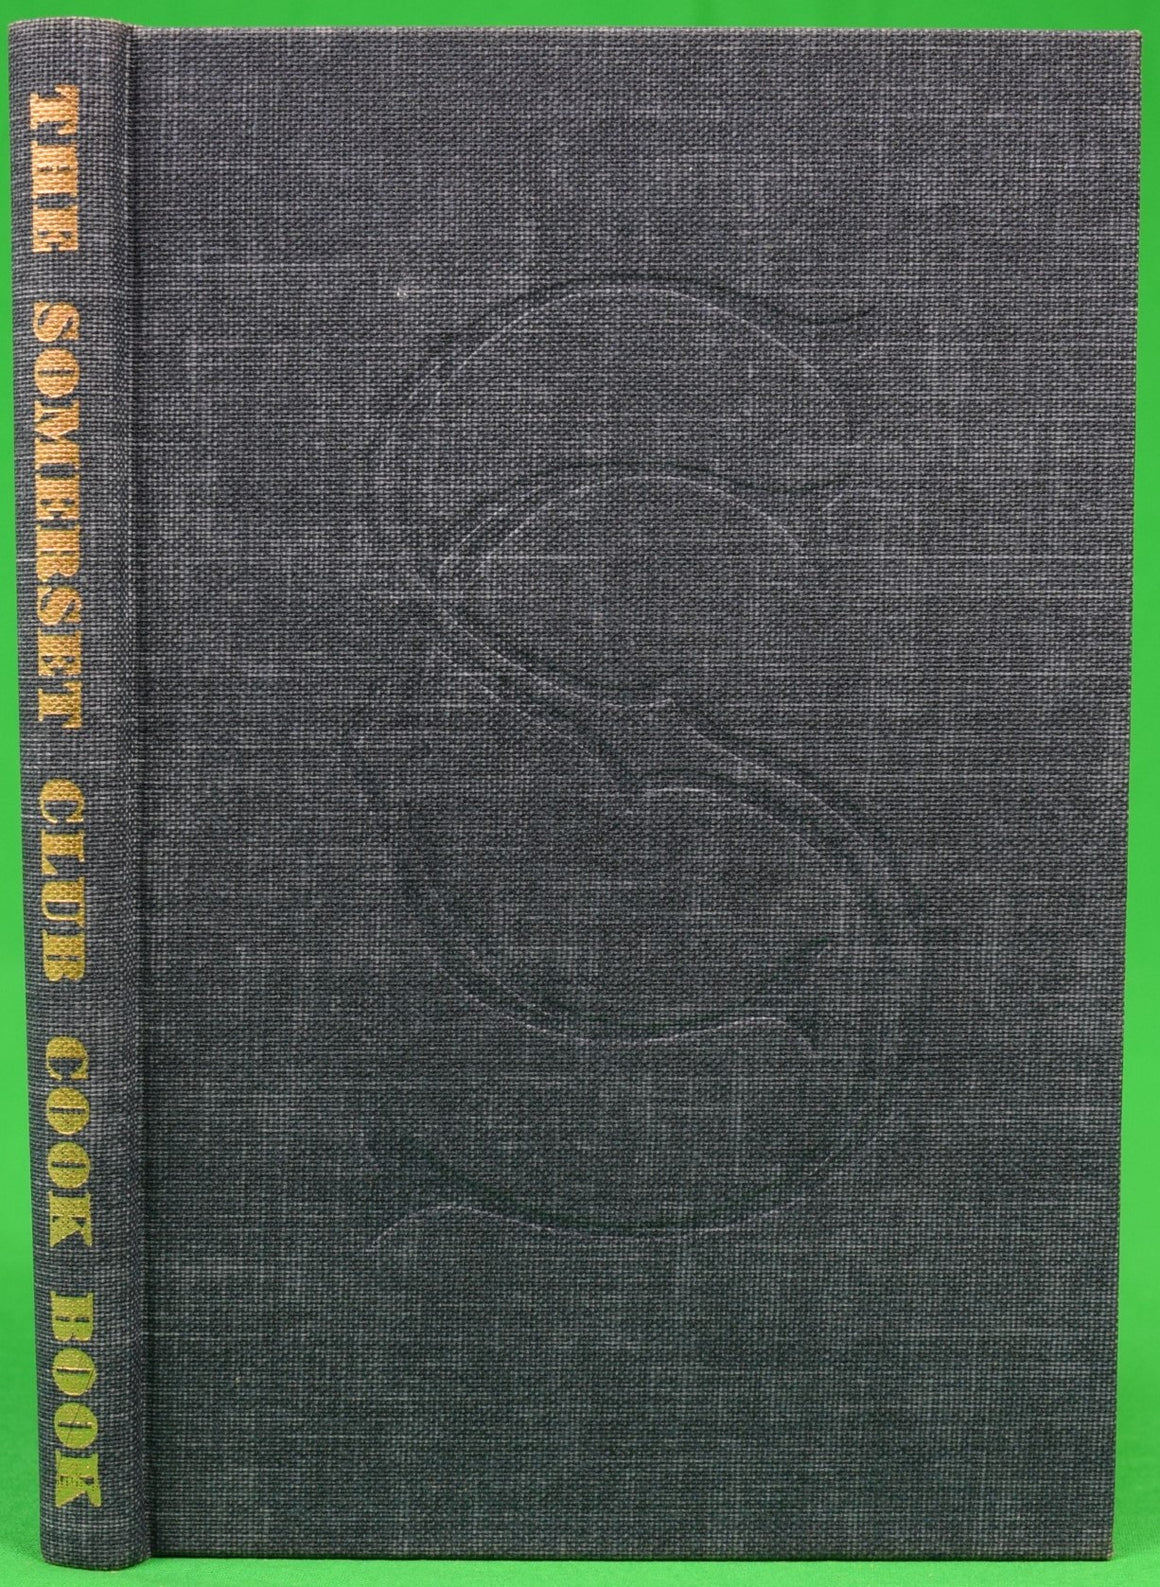 "The Somerset Club Cook Book" 1963